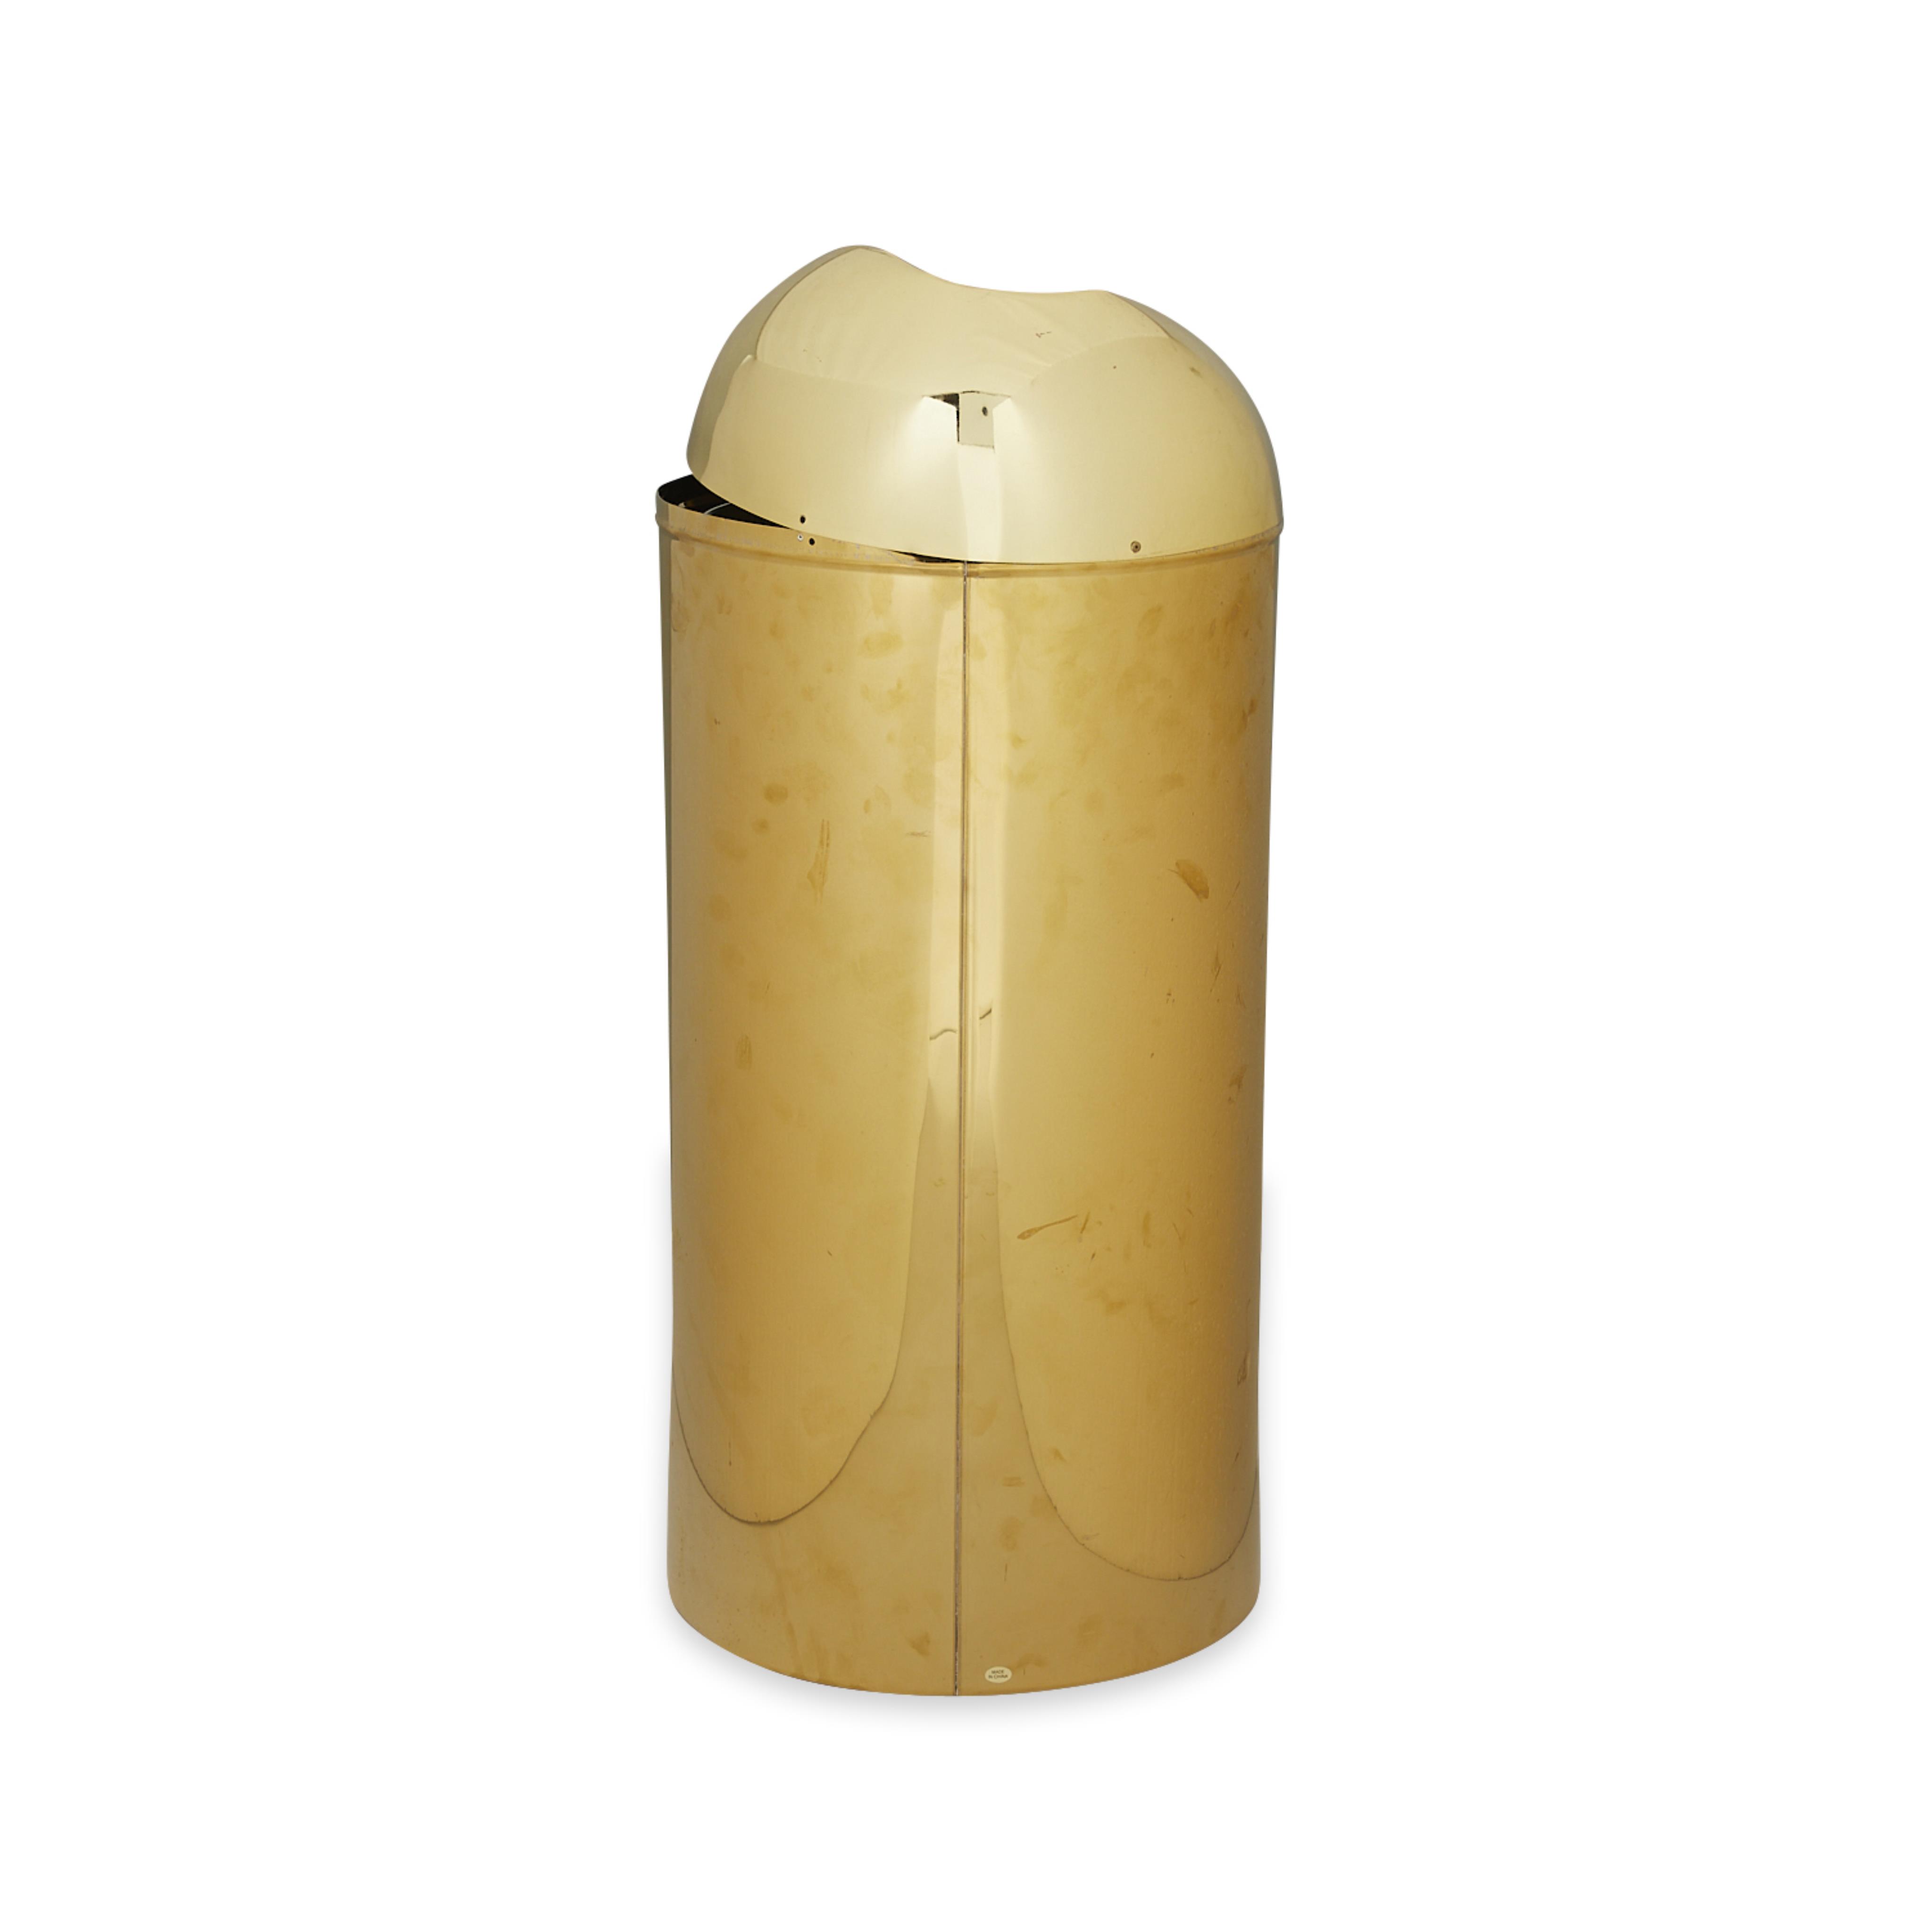 Joe Smith Gold-Tone Garbage Can 2008 - Image 5 of 12